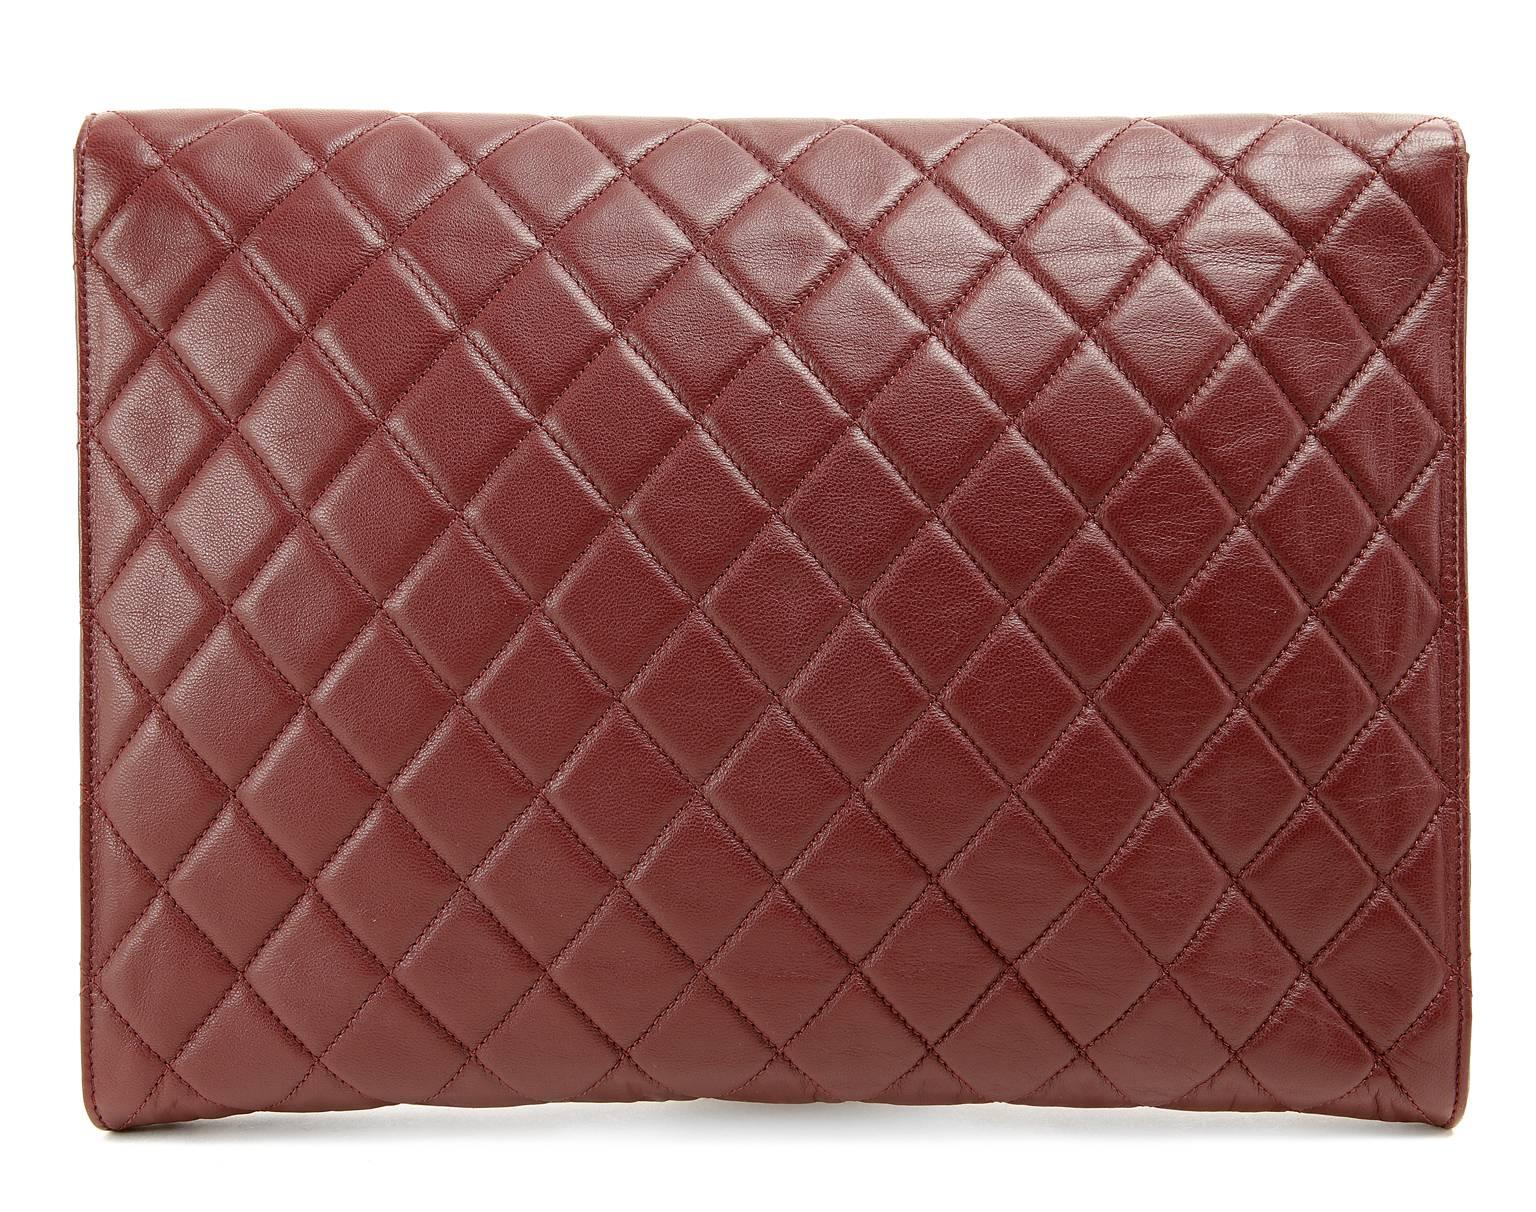 Chanel Bordeaux Leather Oversized Clutch- Pristine;  appears never carried
 A gloriously chic document holder or a strikingly beautiful clutch, this Chanel is a versatile addition to any collection.
 
Bordeaux wine leather oversized clutch is